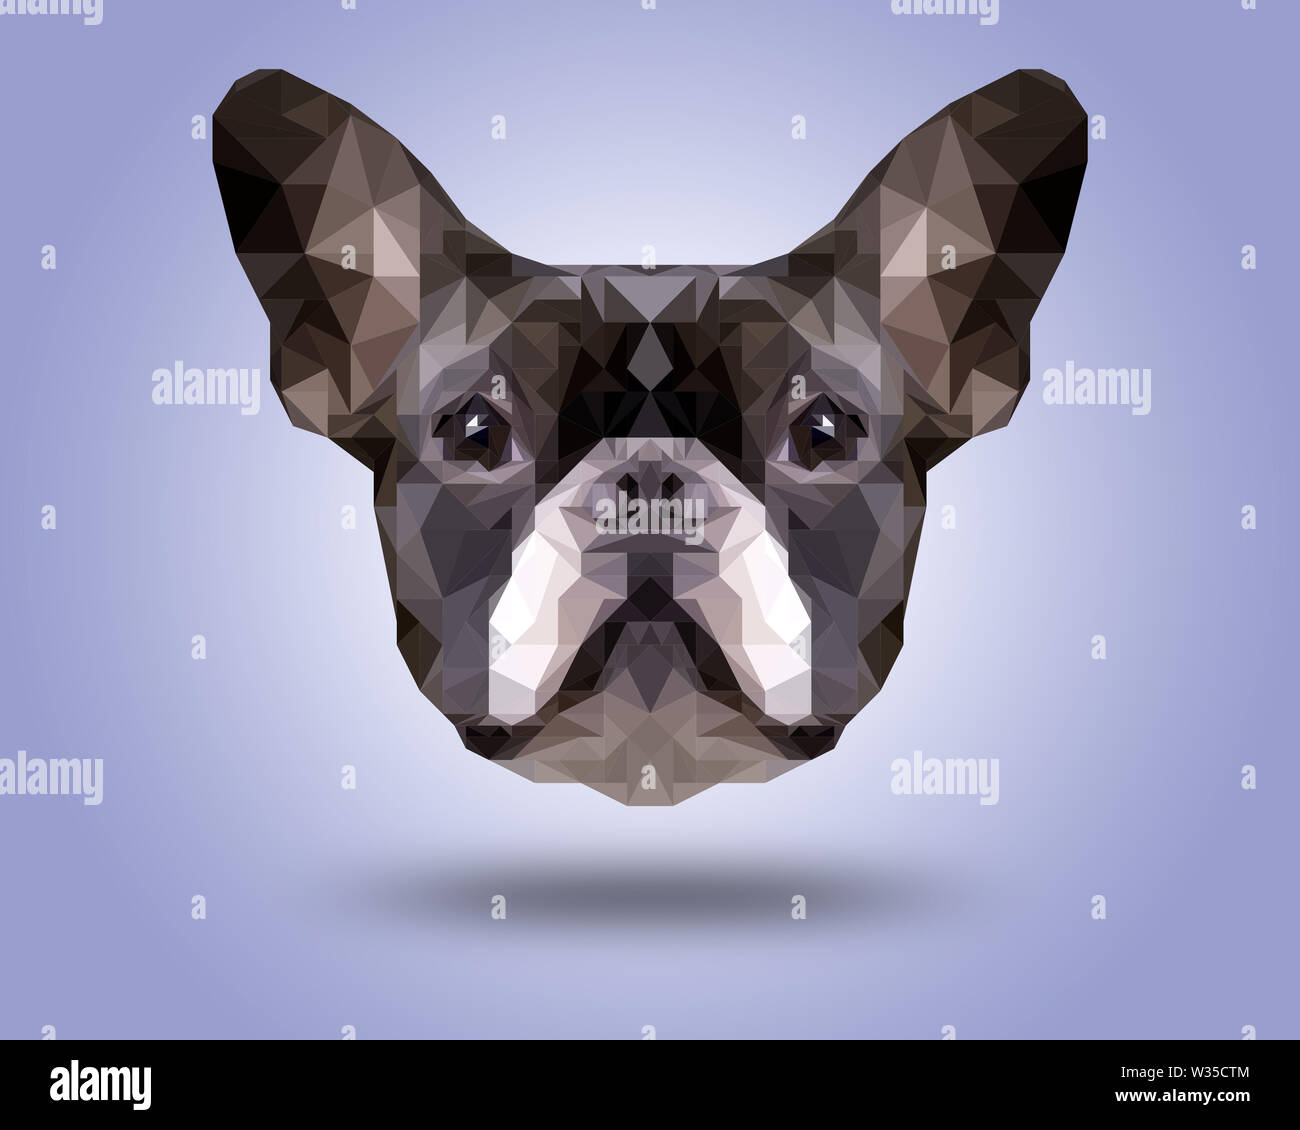 Symmetrical illustration of Boston terrier . Made in low poly triangular style. Stock Photo